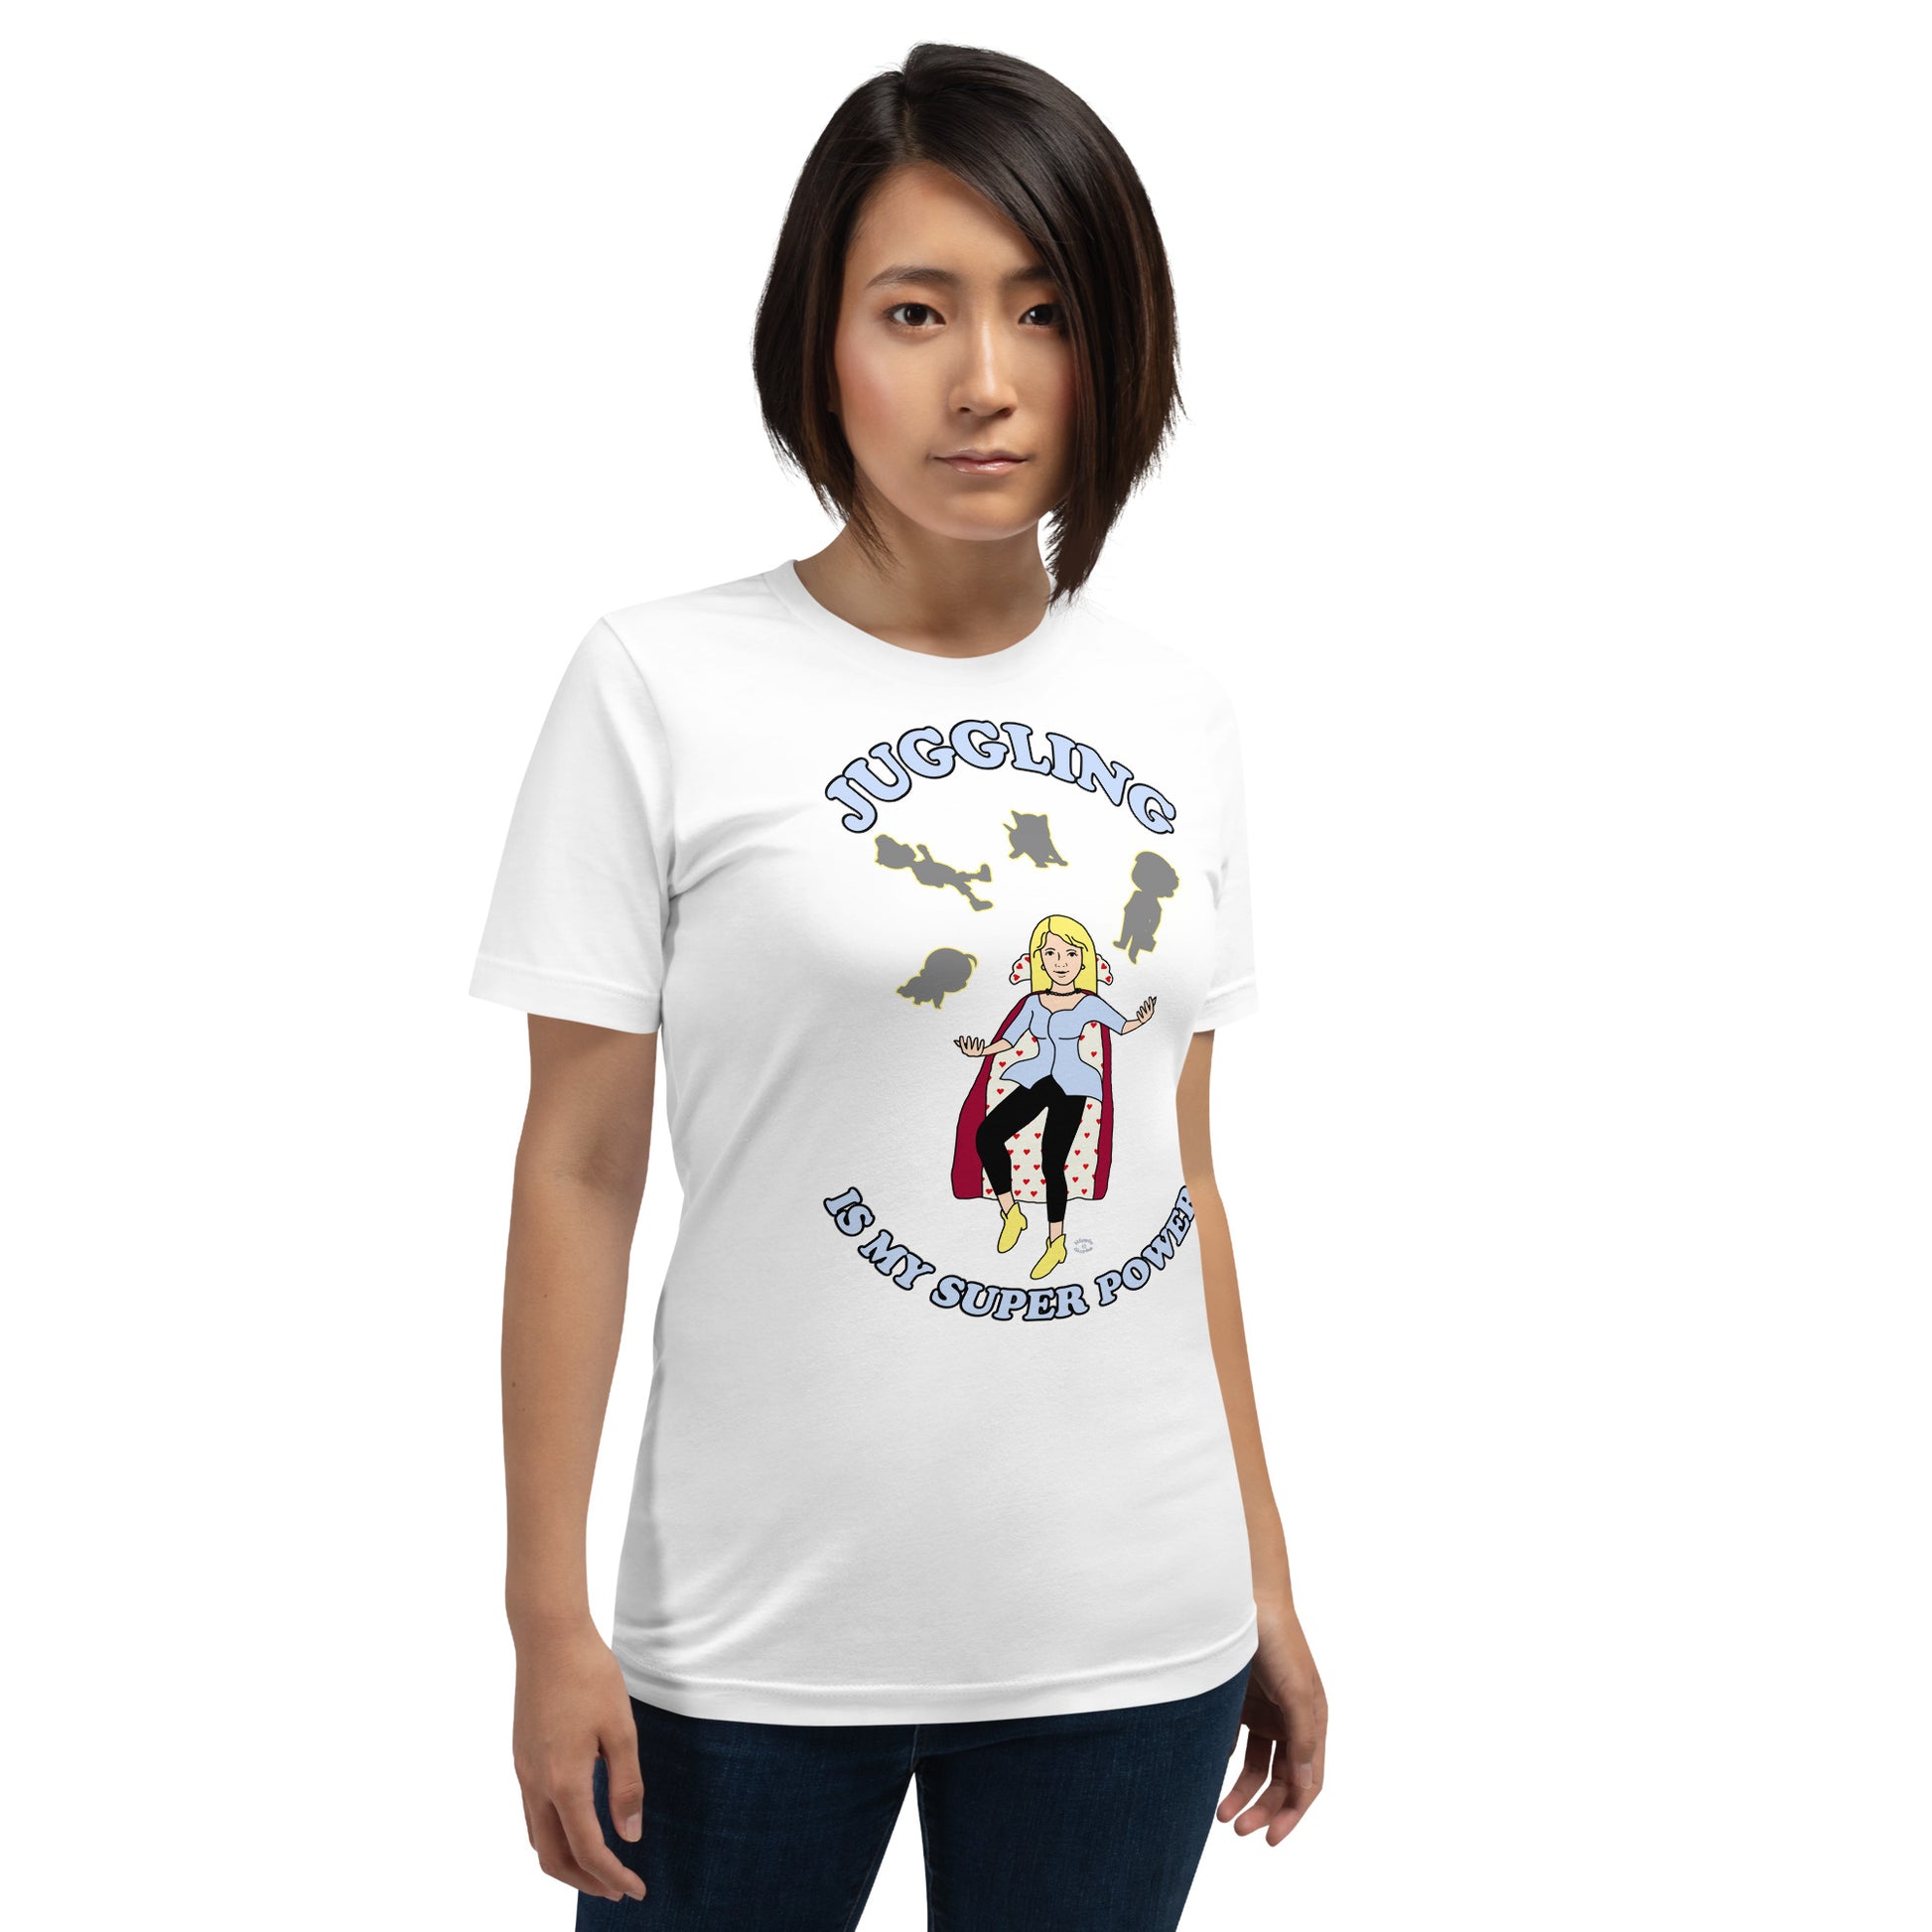 A women wearing a unisex short sleeve tshirt which has on the front a cartoon women in a cape juggling her family like a jester and the text Juggling Is My Super Power - front - white